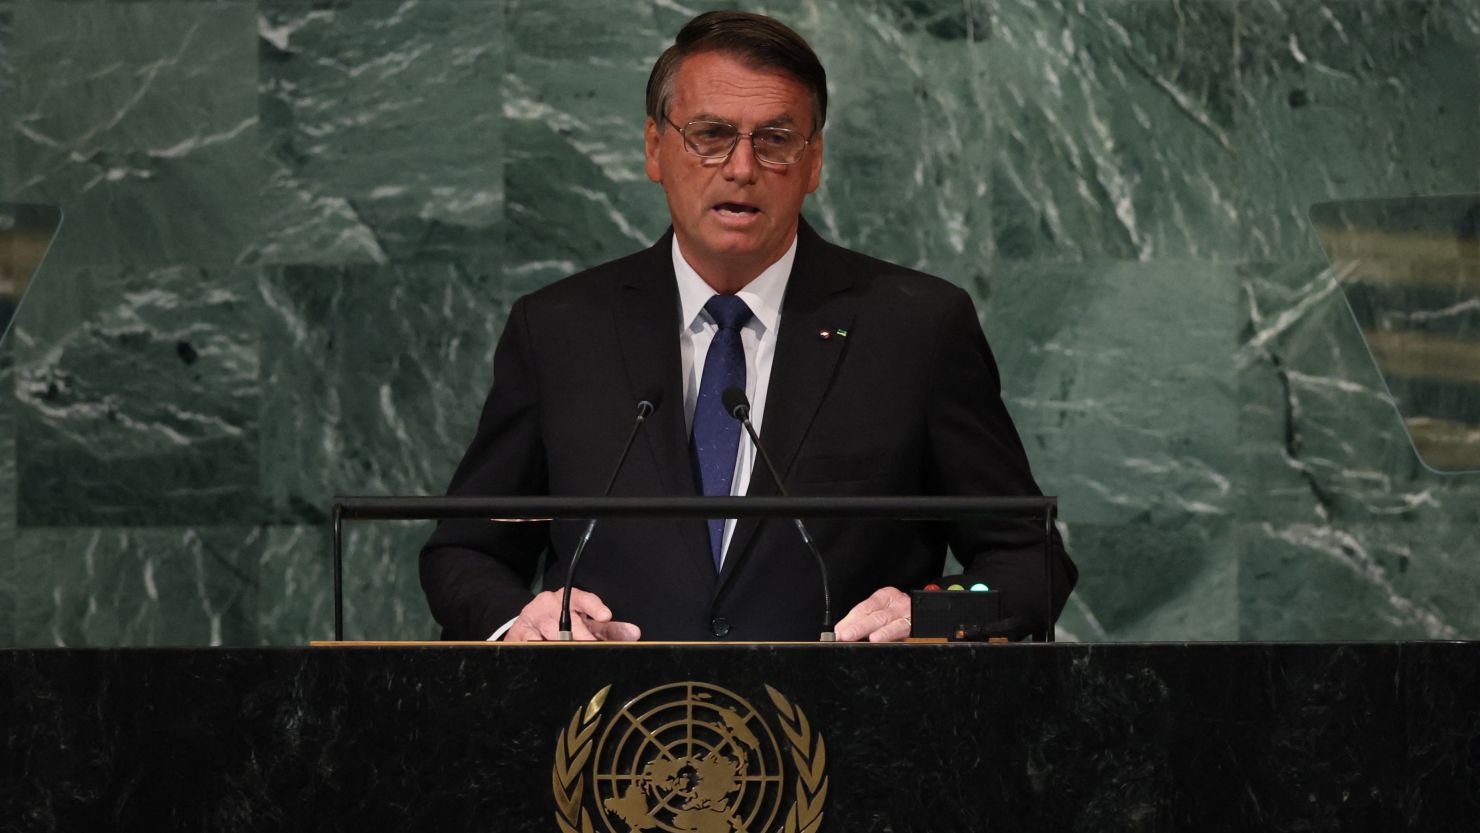 Brazil's President Jair Bolsonaro addresses the 77th Session of the United Nations General Assembly at UN Headquarters in New York City on Sept 20, 2022.